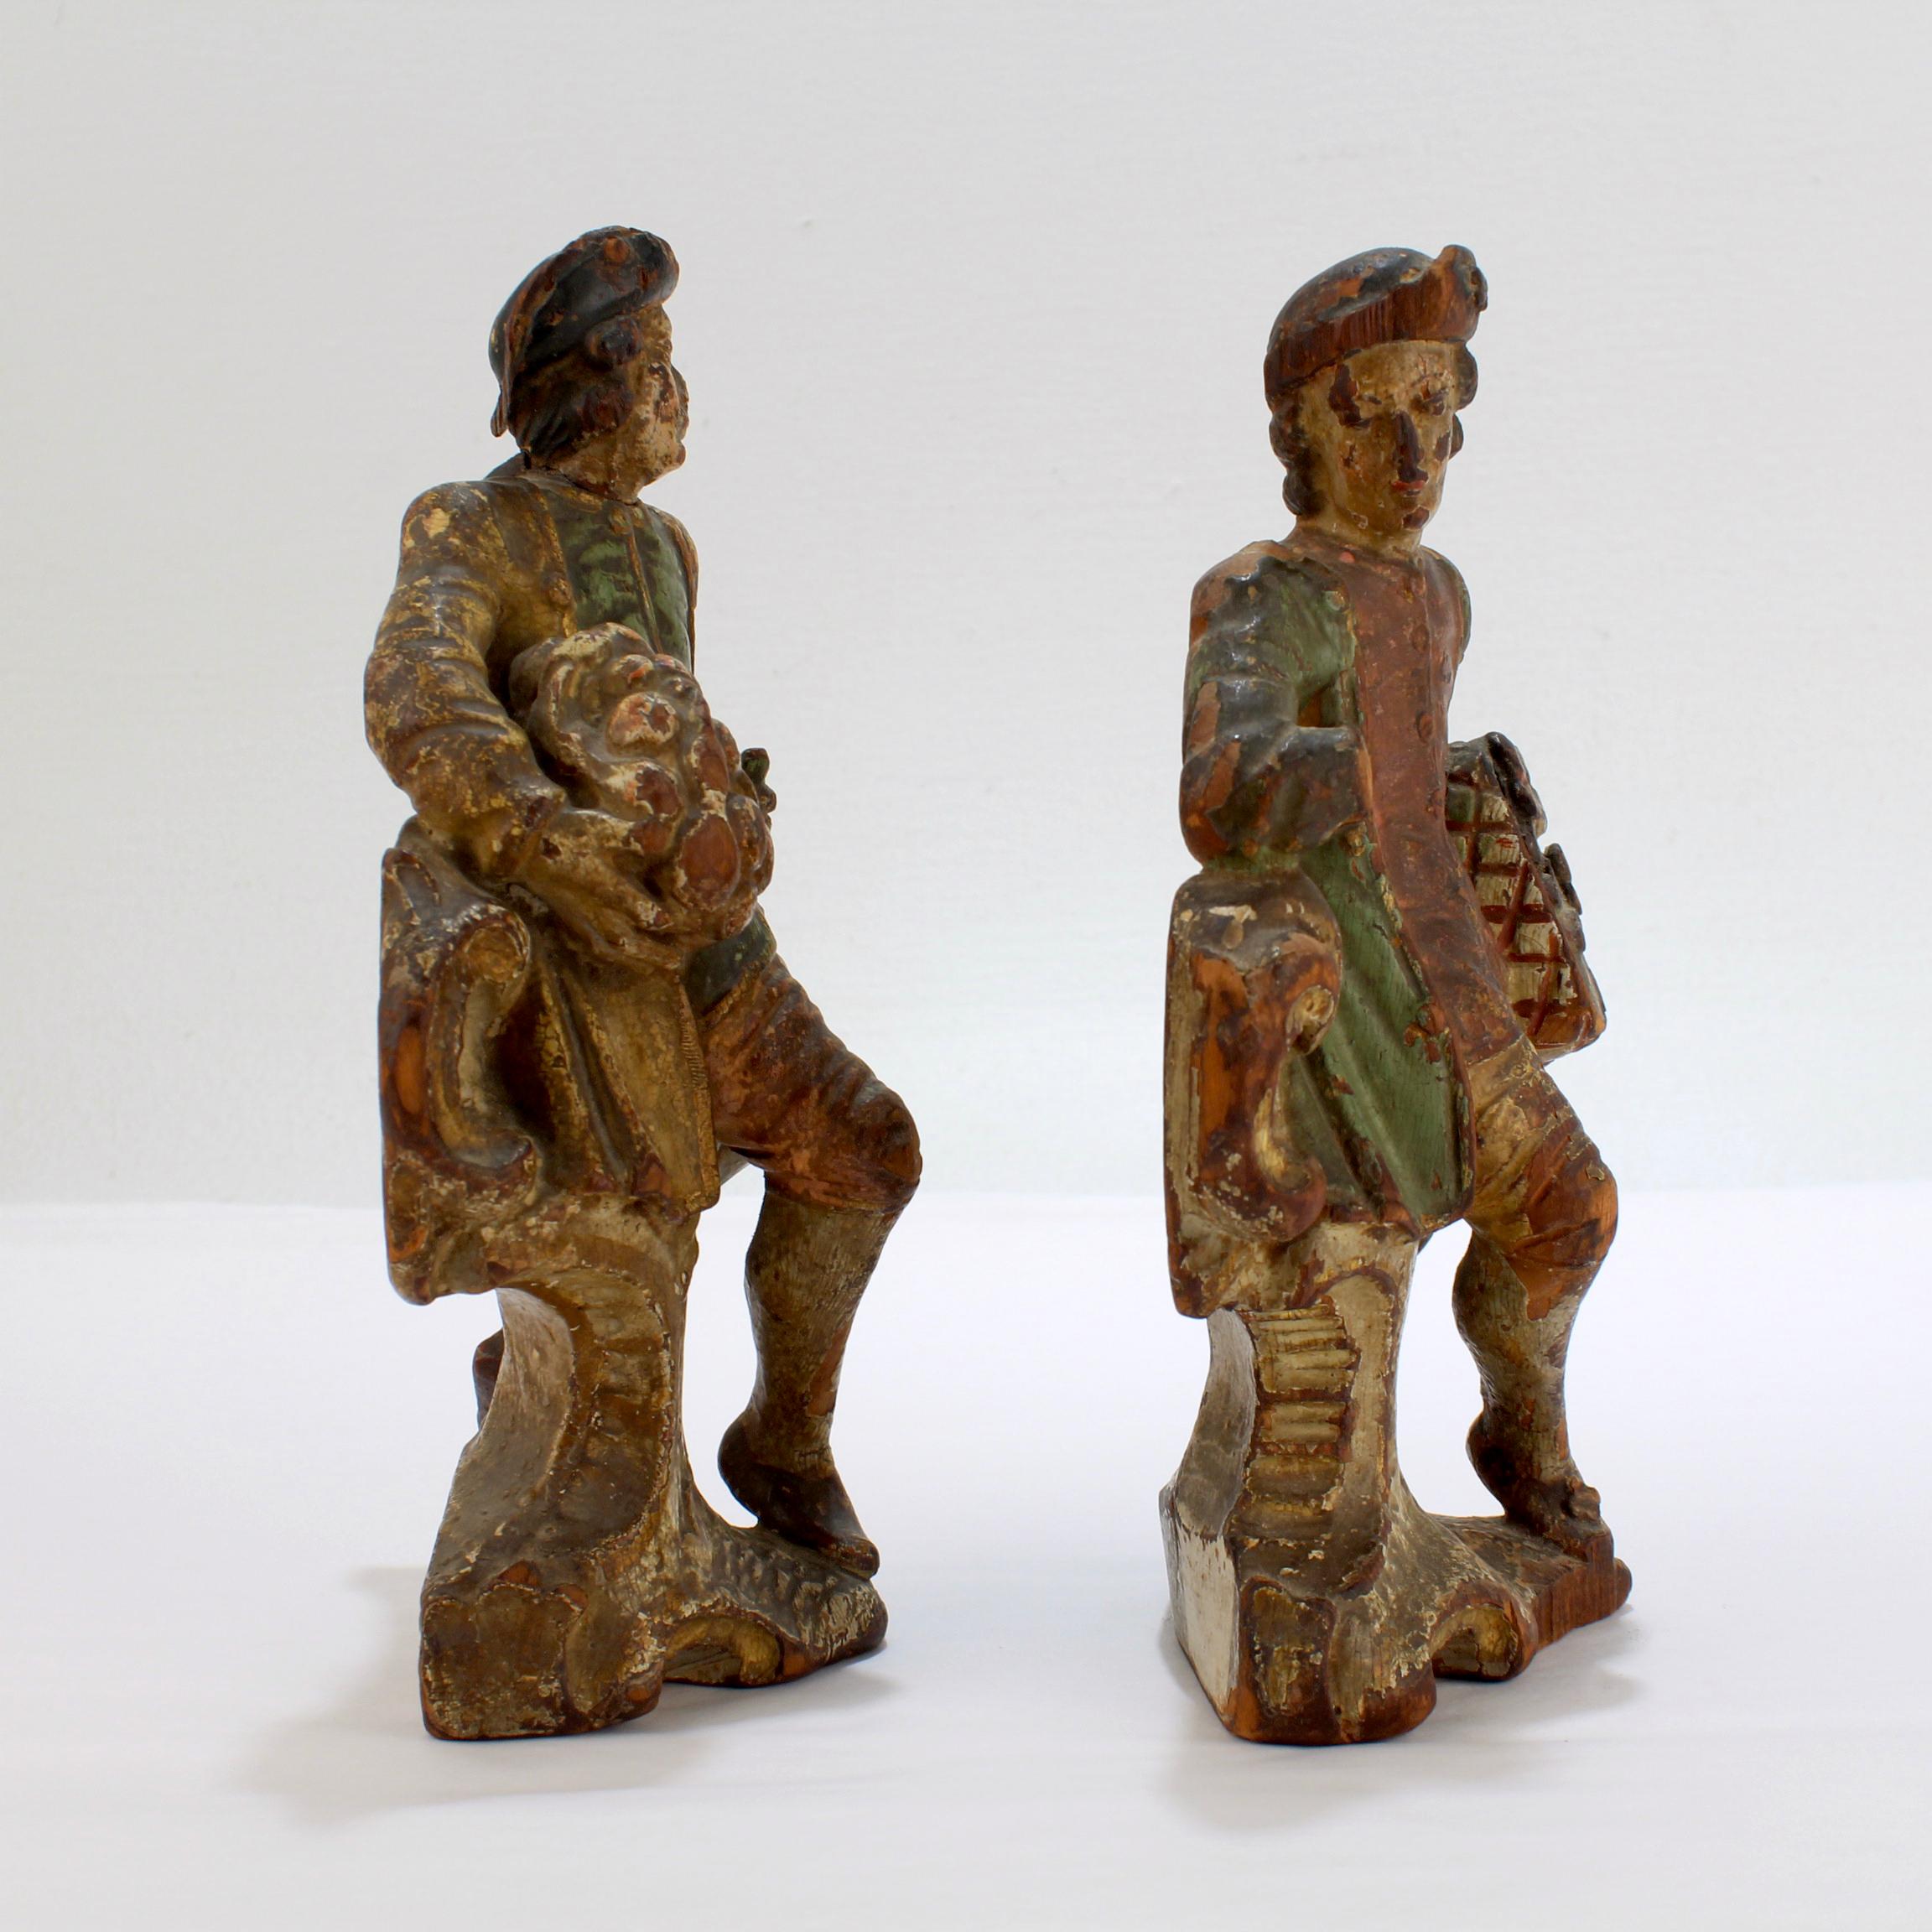 2 Baroque 18th Century Carved Polychrome Decorated Wooden Continental Figurines In Fair Condition For Sale In Philadelphia, PA